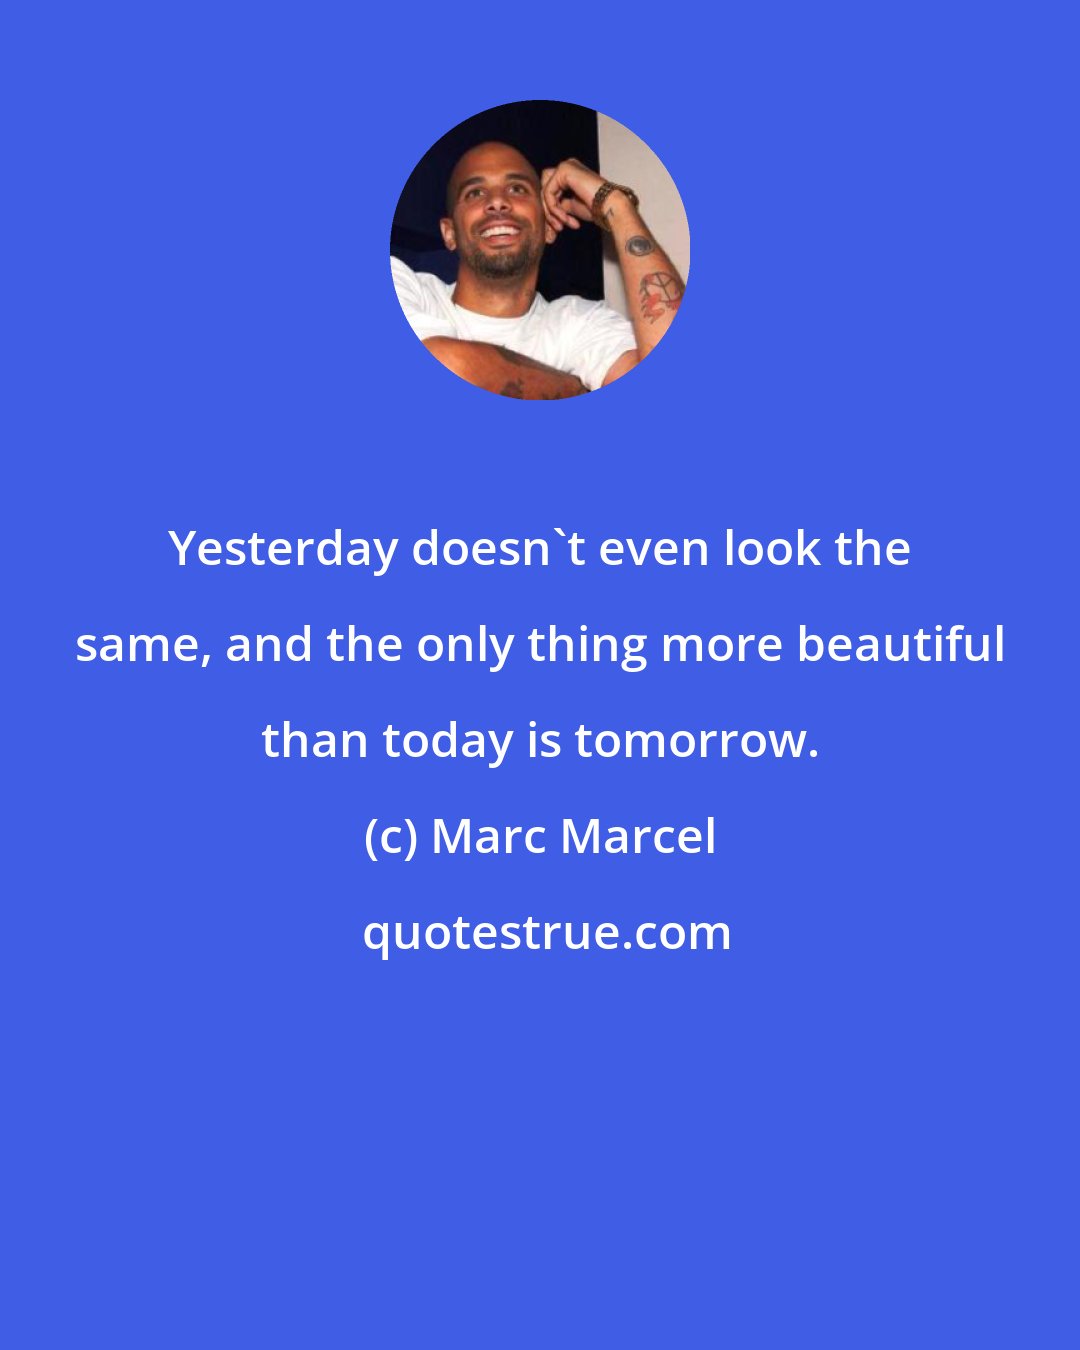 Marc Marcel: Yesterday doesn't even look the same, and the only thing more beautiful than today is tomorrow.